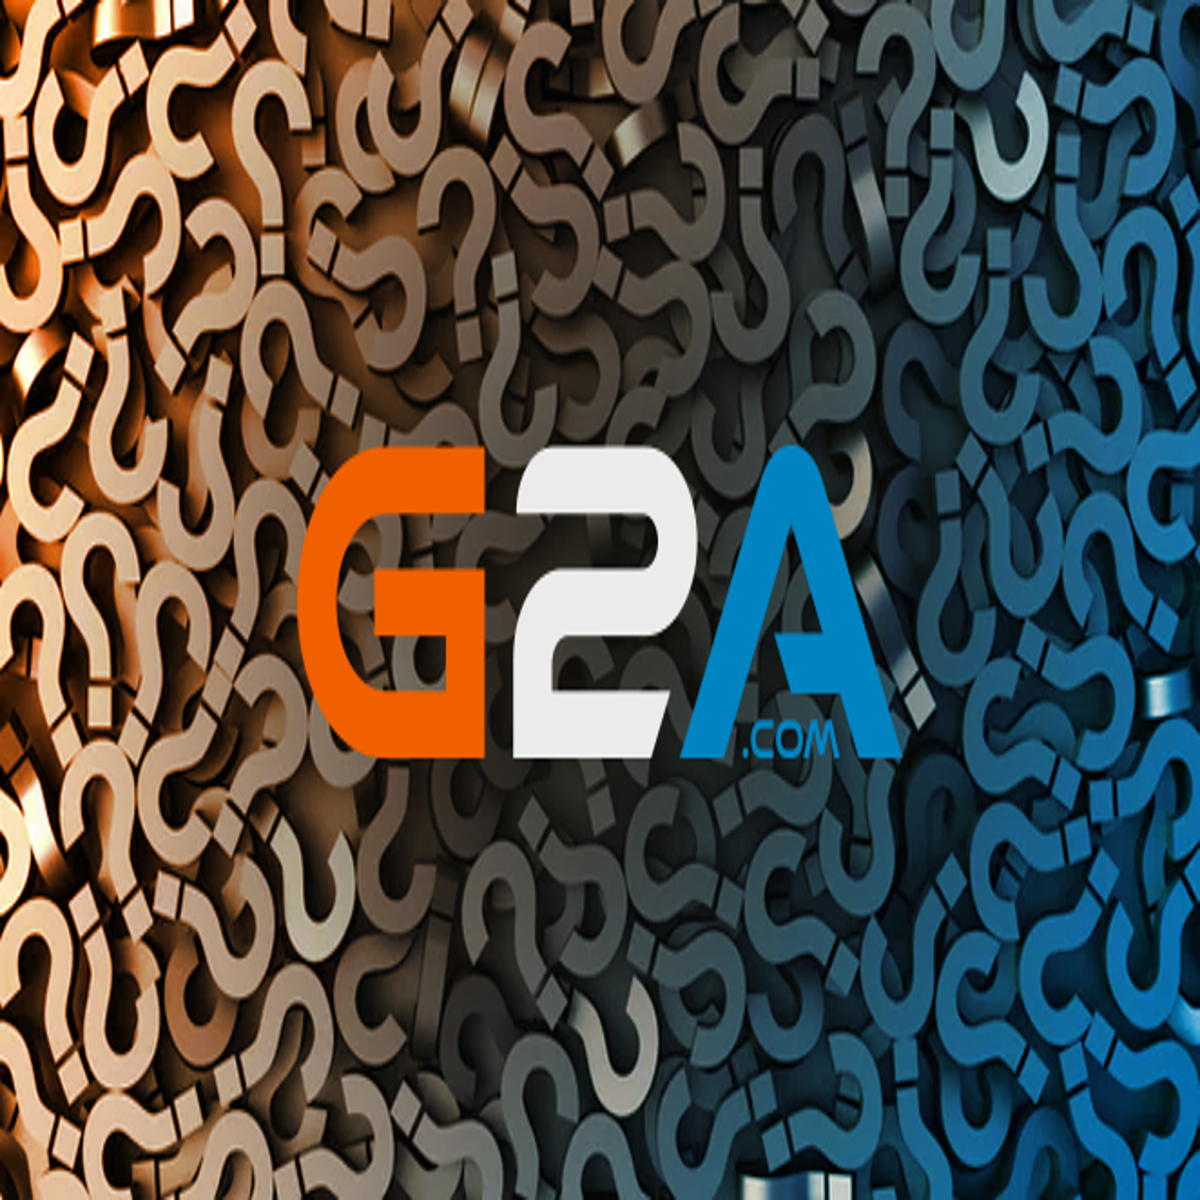 The Best Games to Play With Friends Online - G2A News